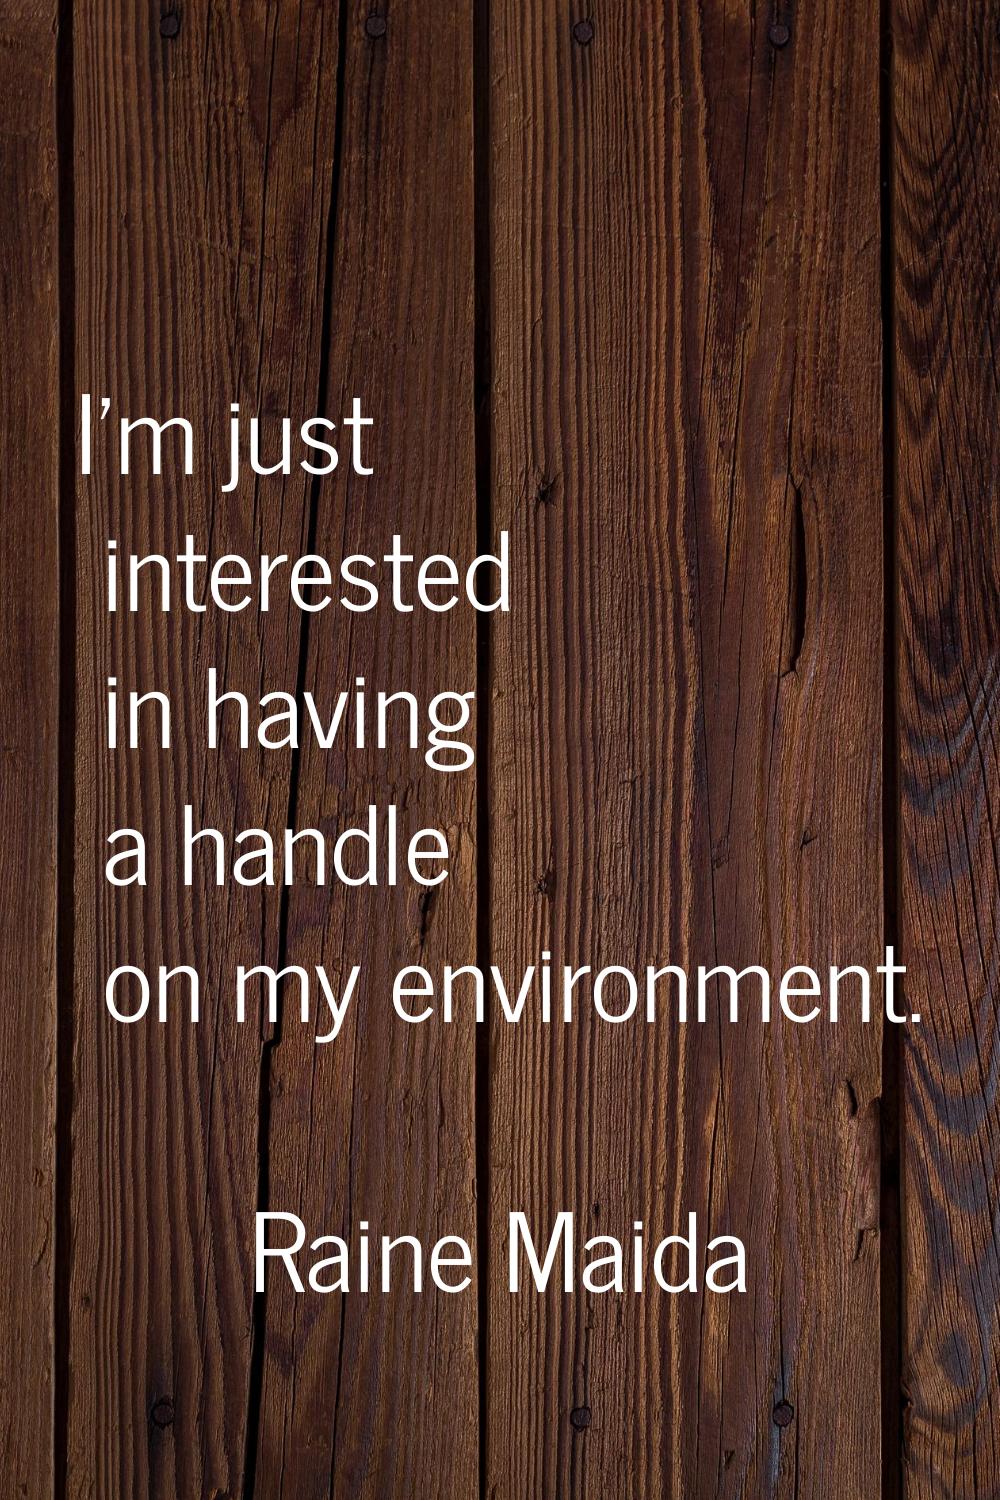 I'm just interested in having a handle on my environment.